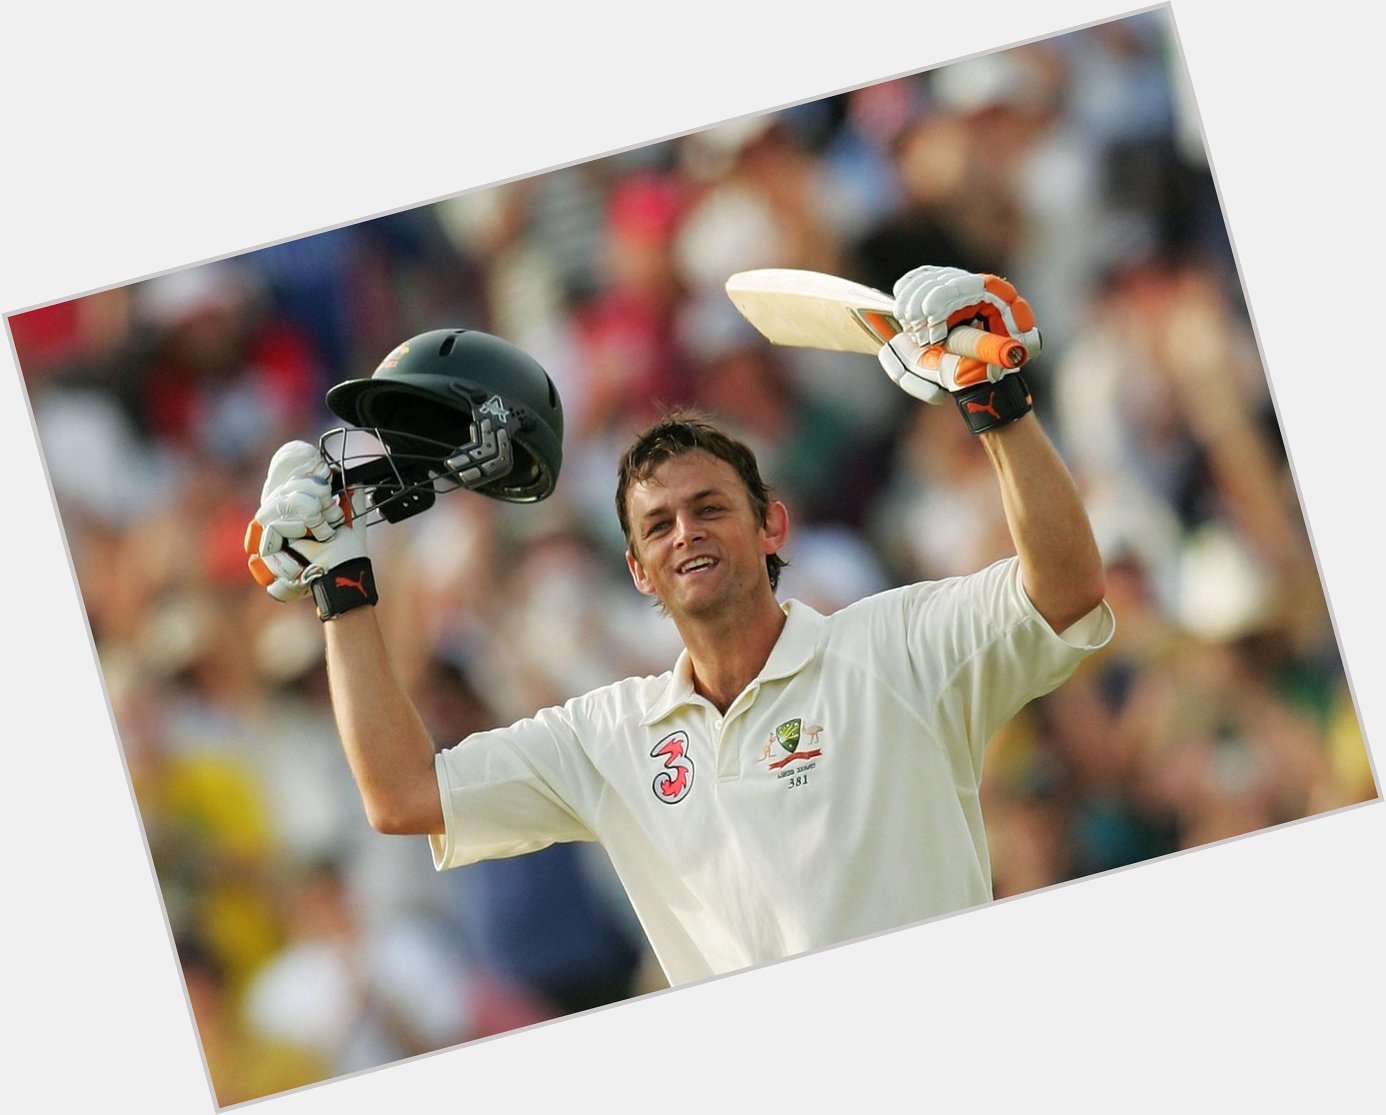 Join us in wishing WA legend Adam Gilchrist a happy 43rd birthday today!!! Enjoy  